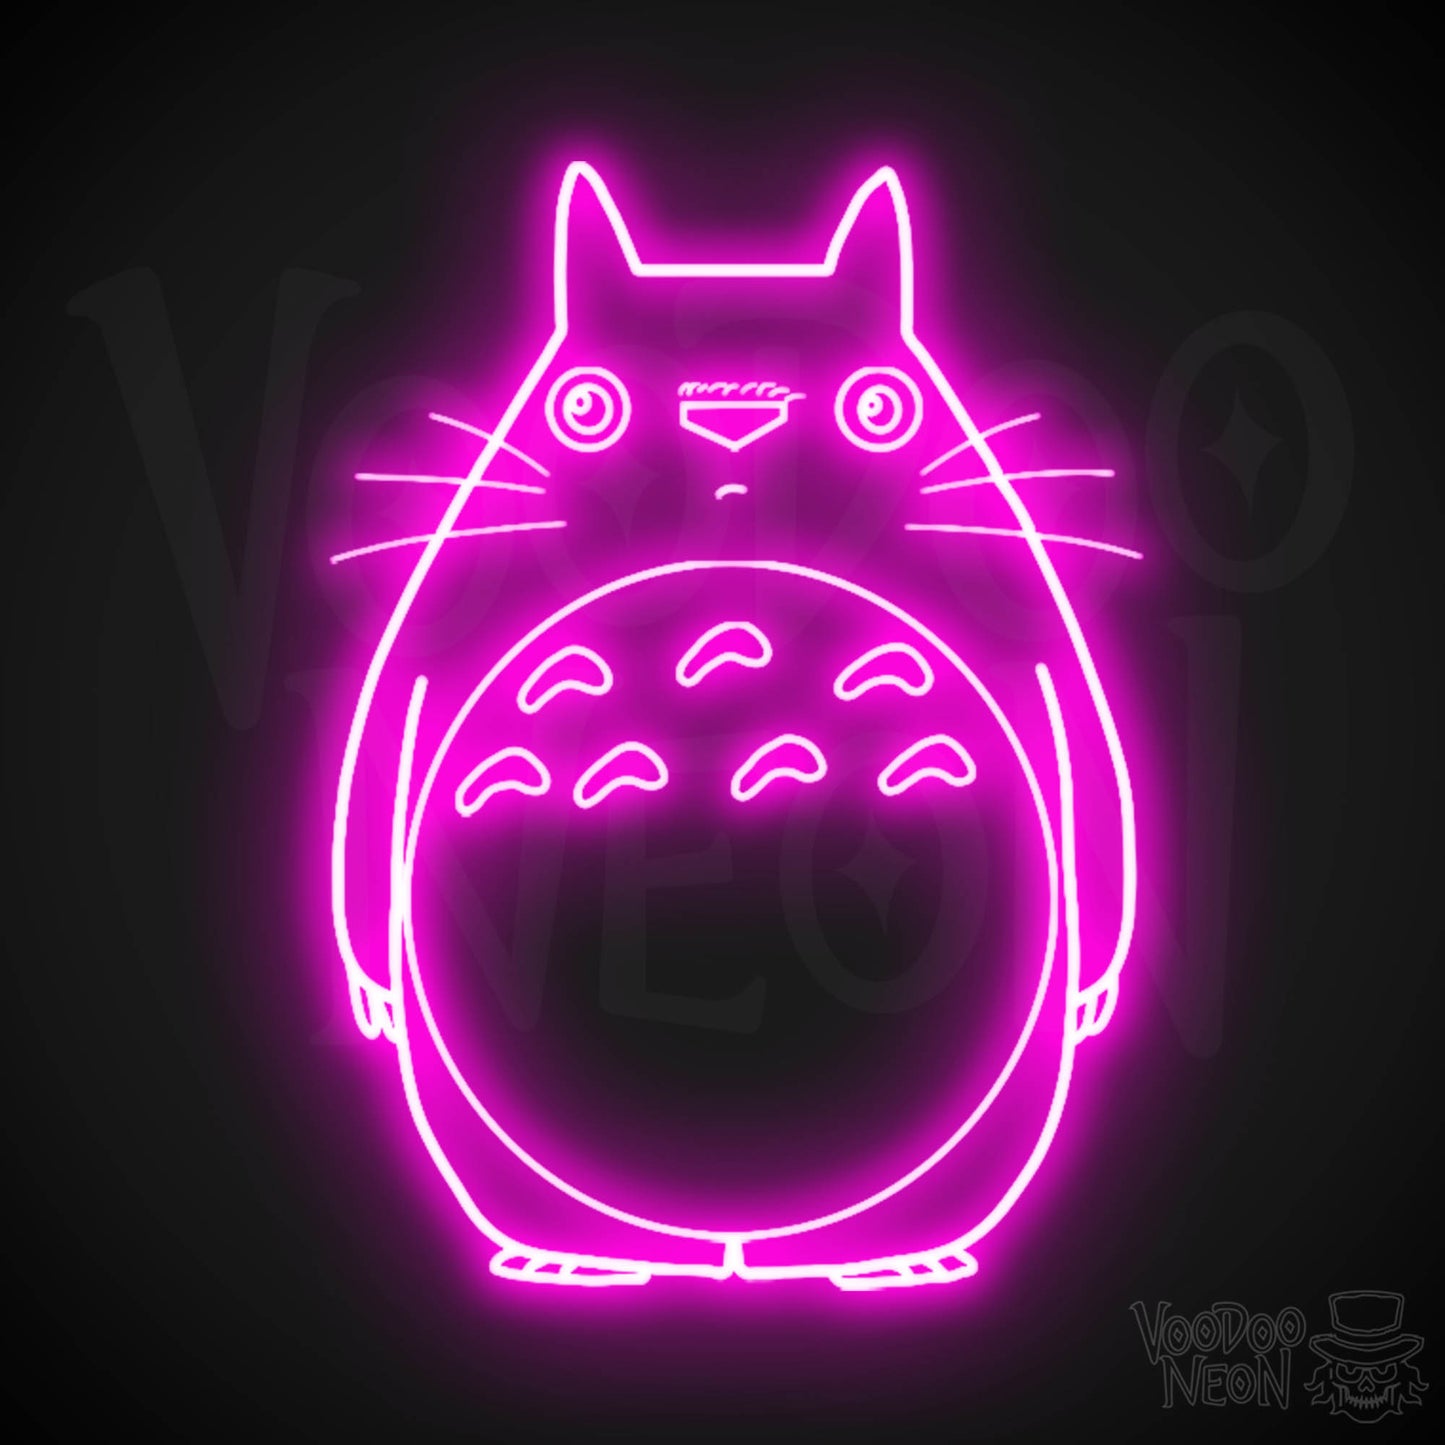 Totoro Neon Wall Art - Neon Totoro Sign - Totoro Neon Sign - LED Wall Art - Color Pink